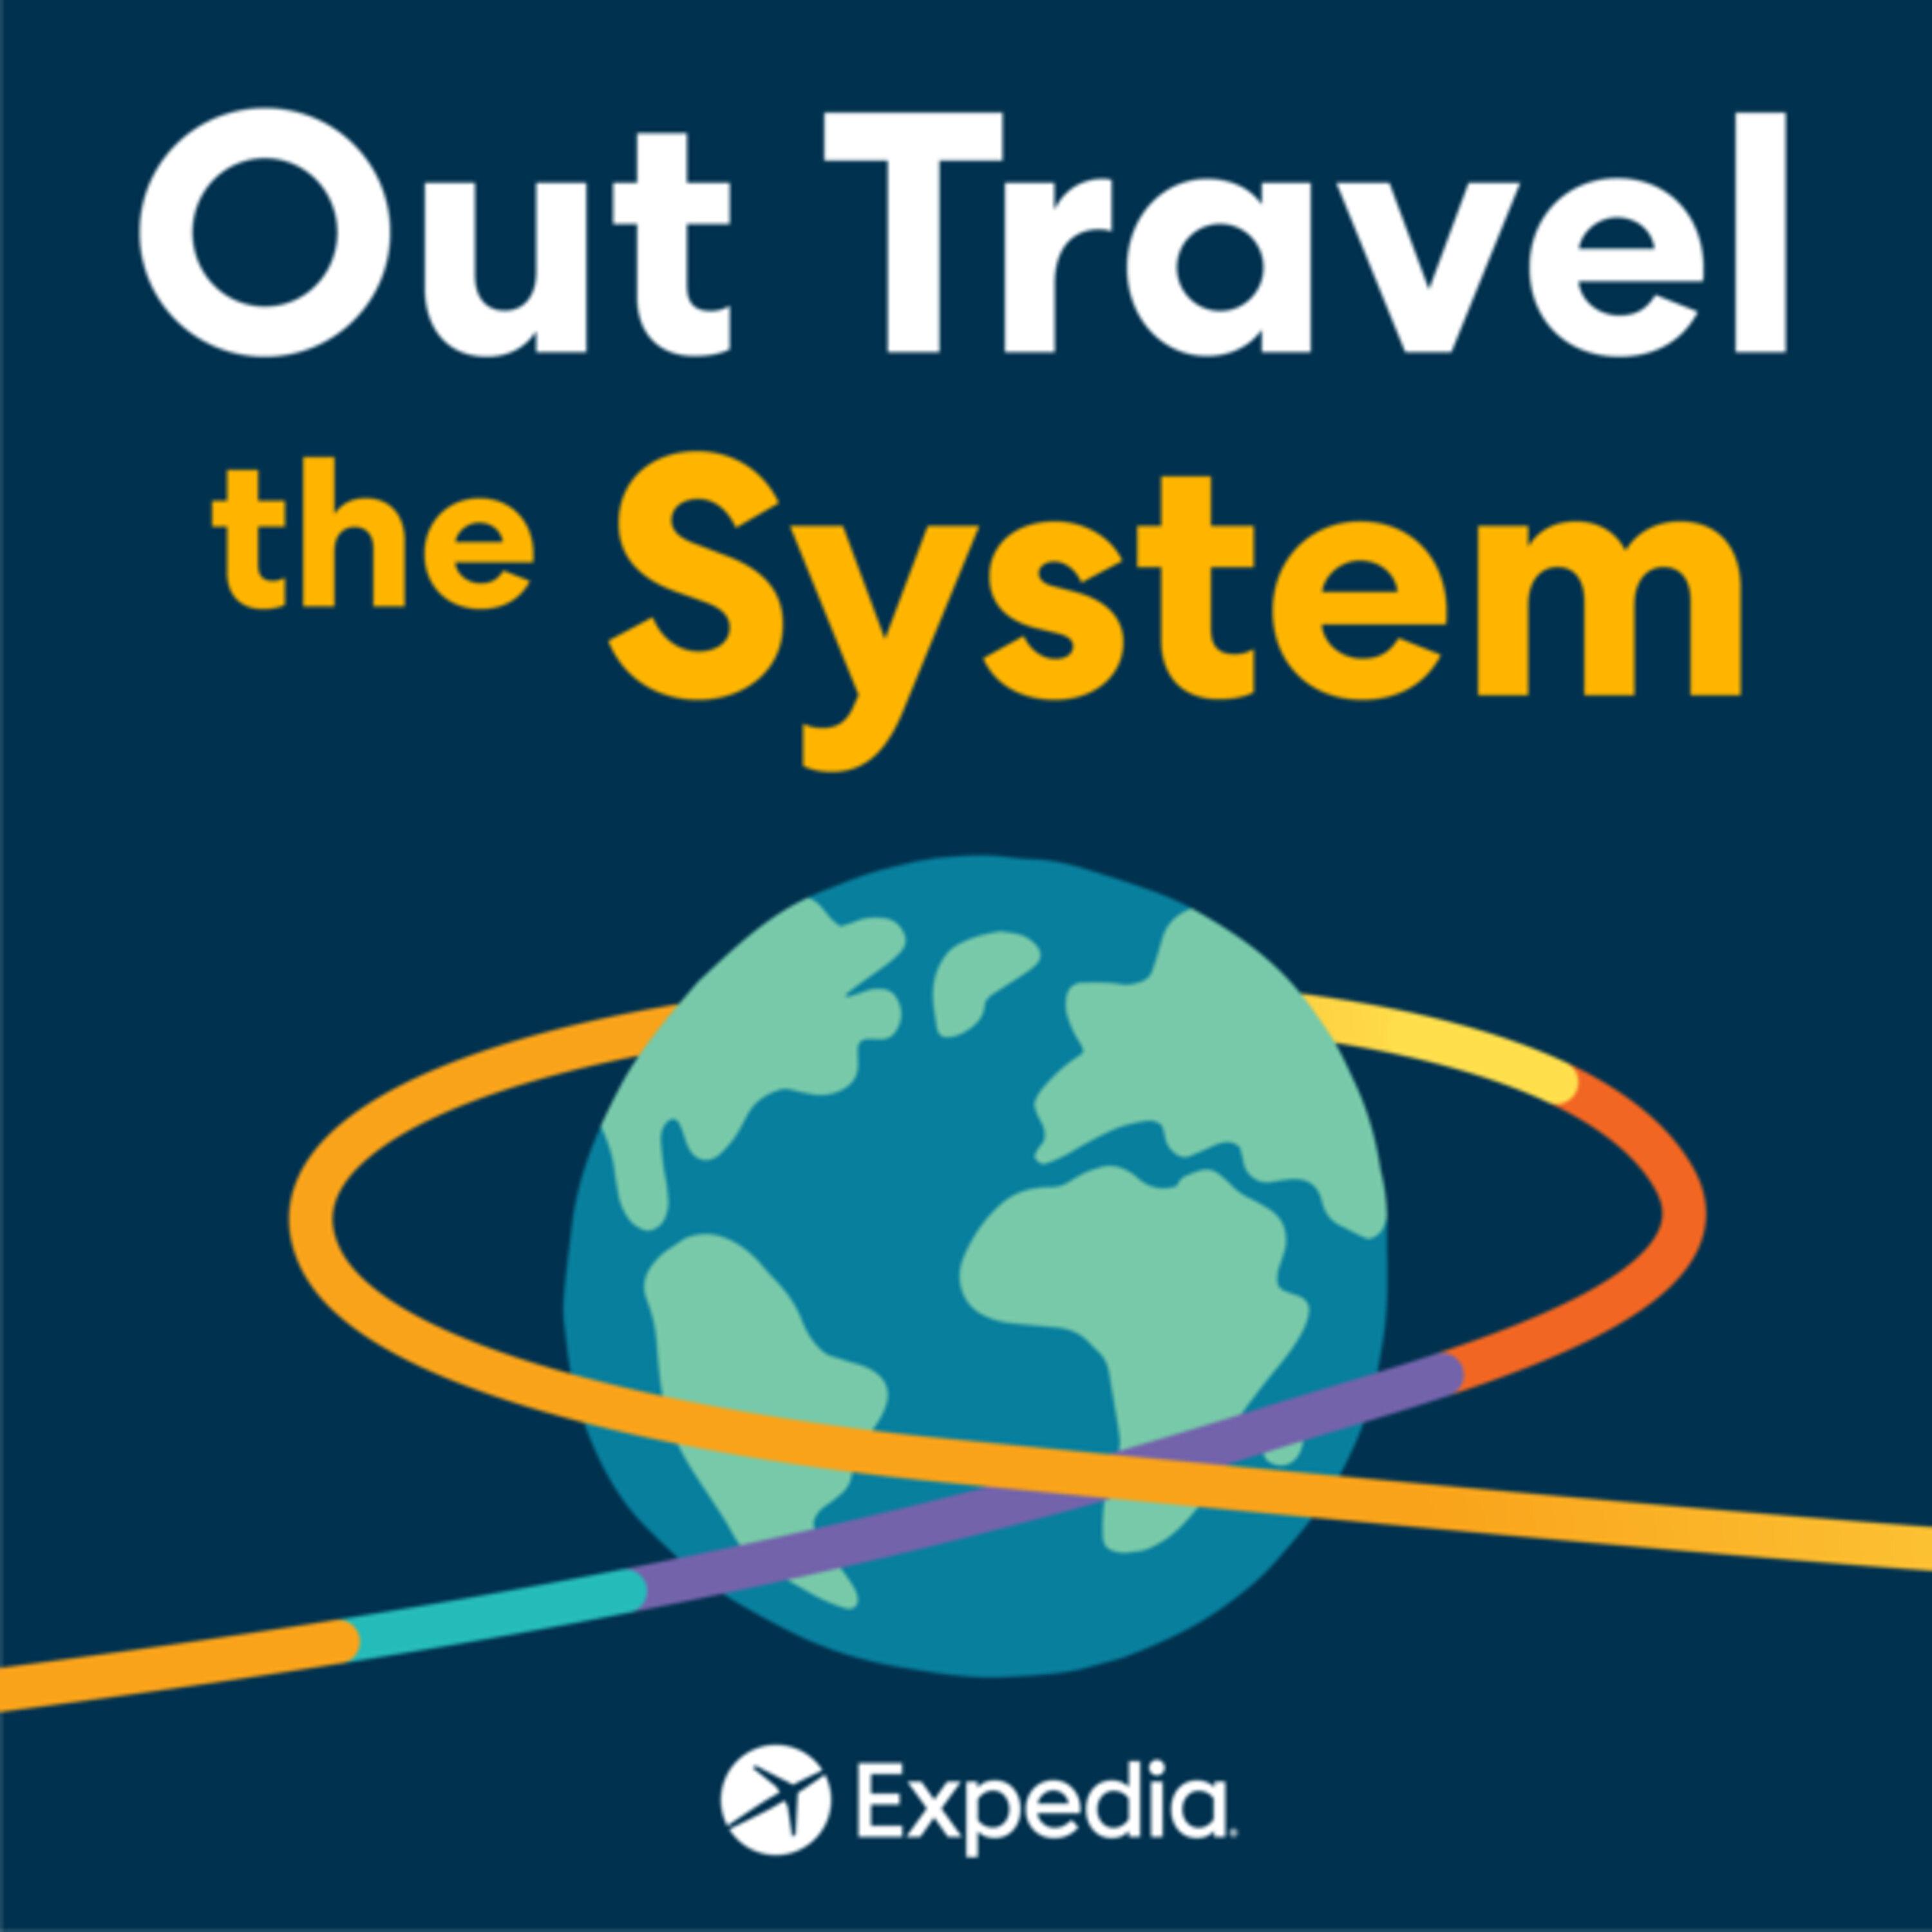 Thumbnail for "Look Into The Travel Future with Expedia's Travel Trends Report".